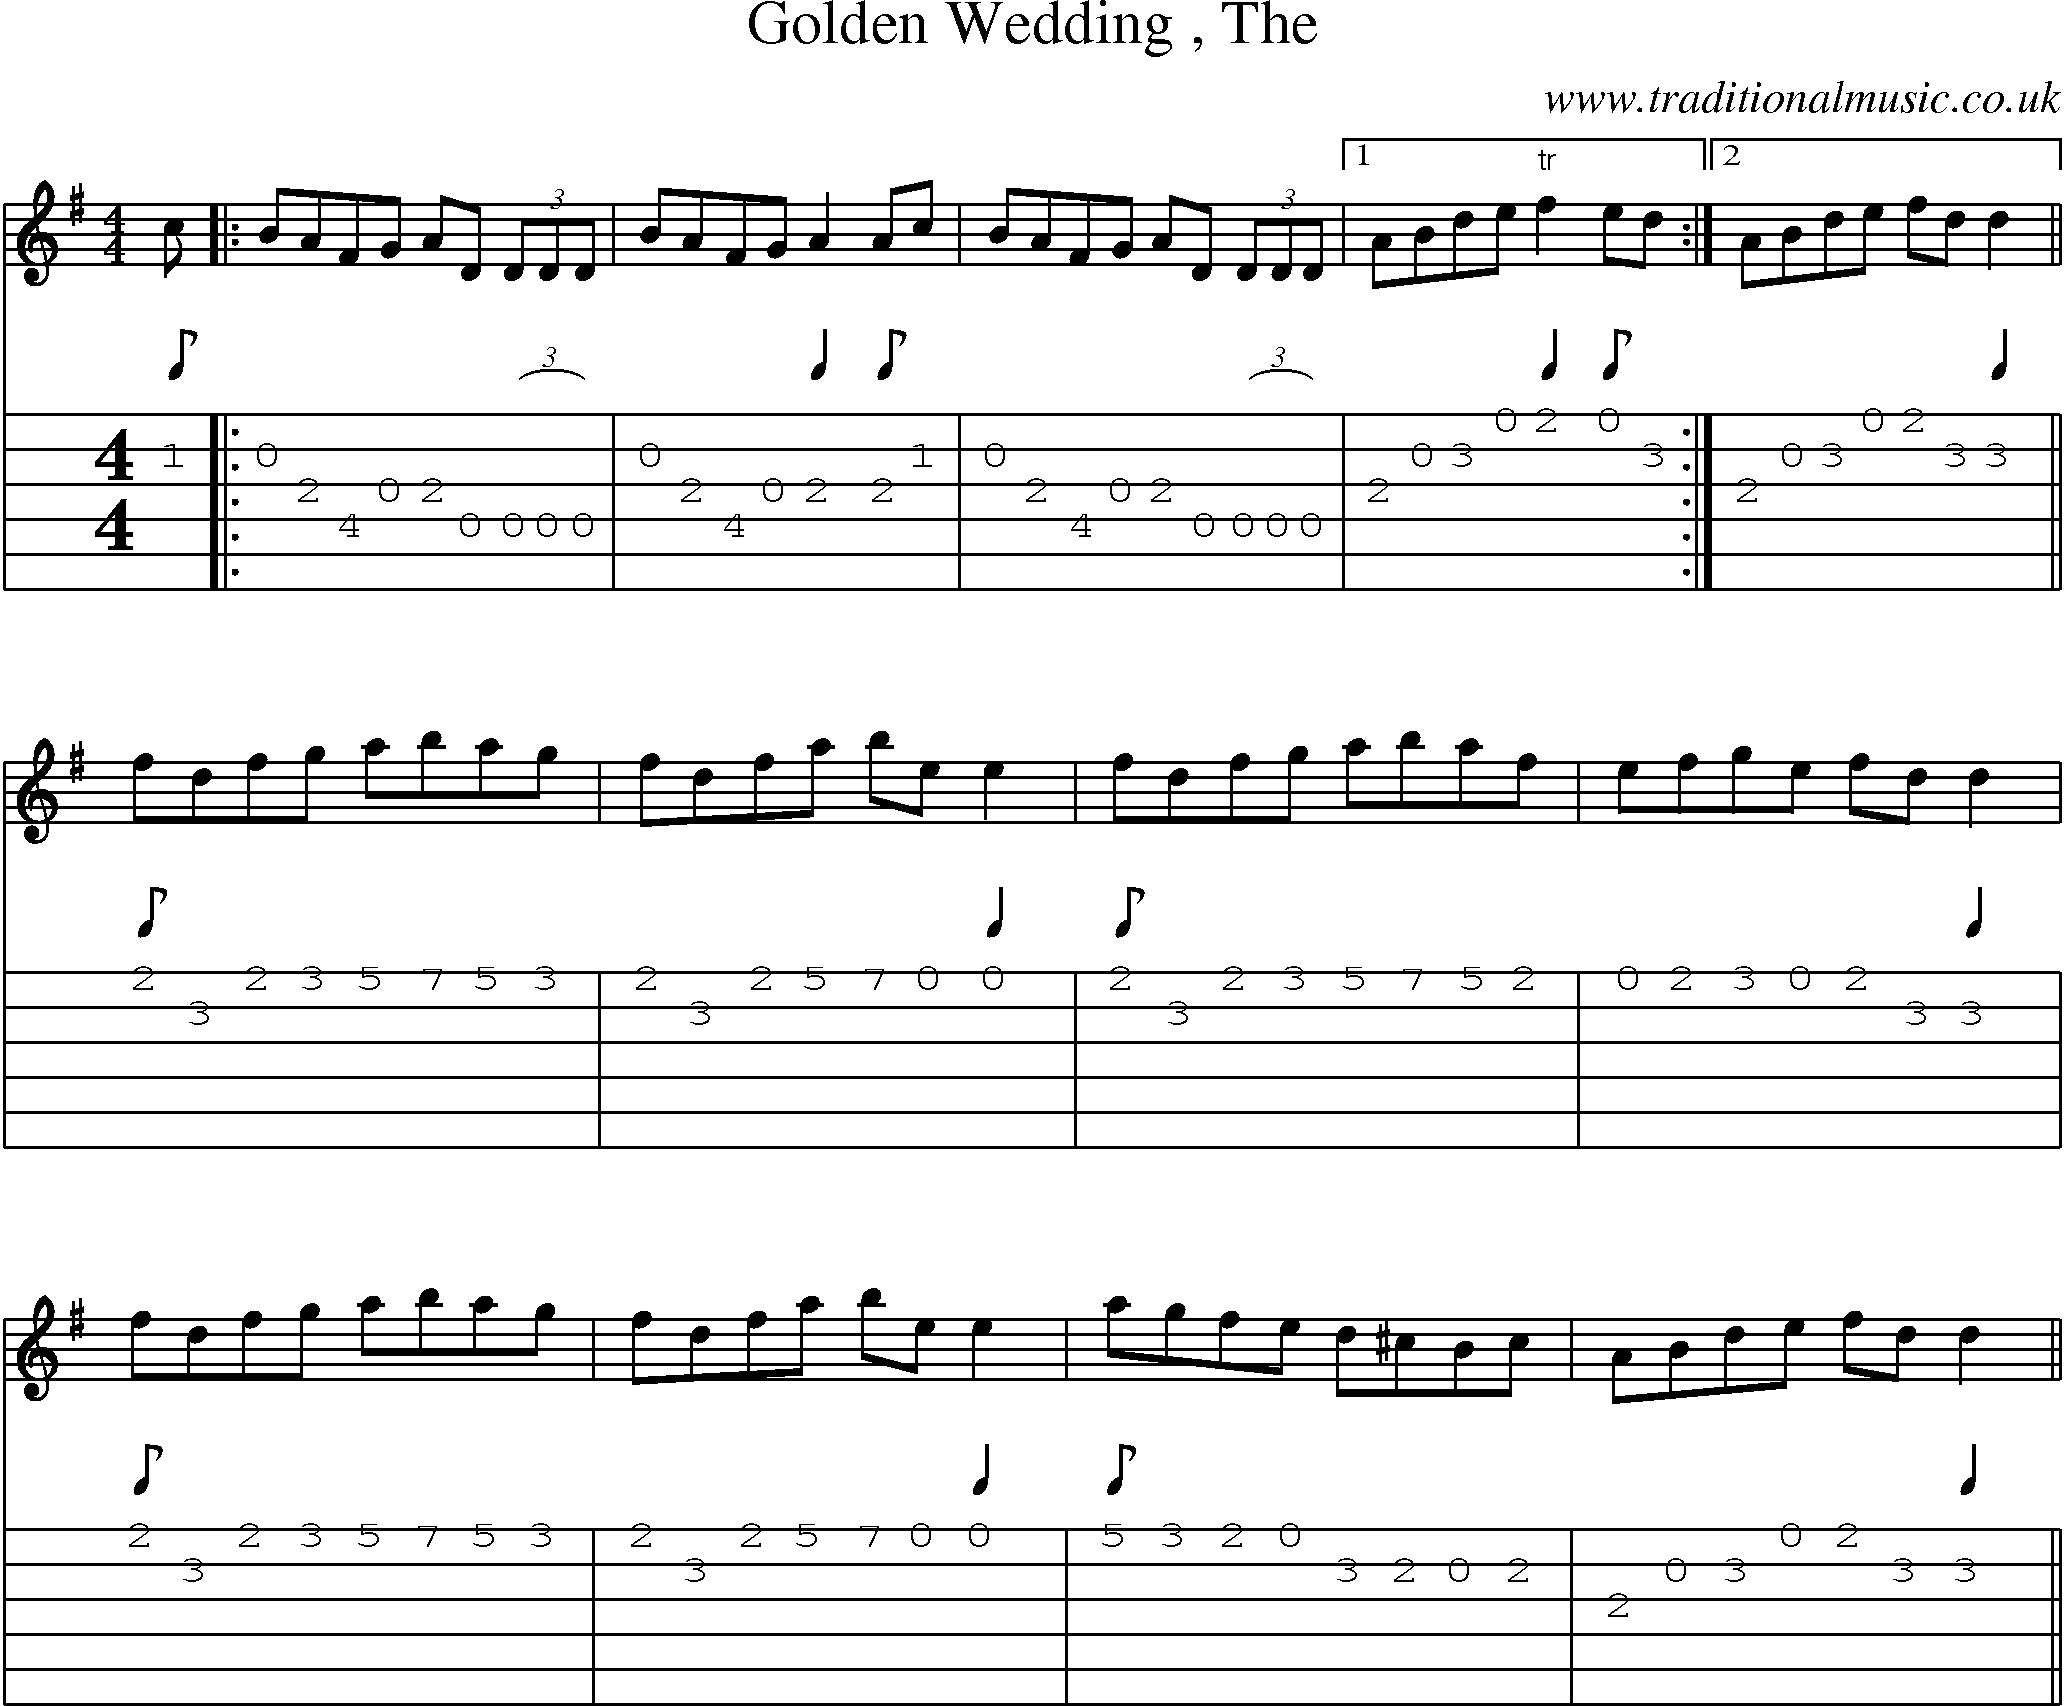 Music Score and Guitar Tabs for Golden Wedding